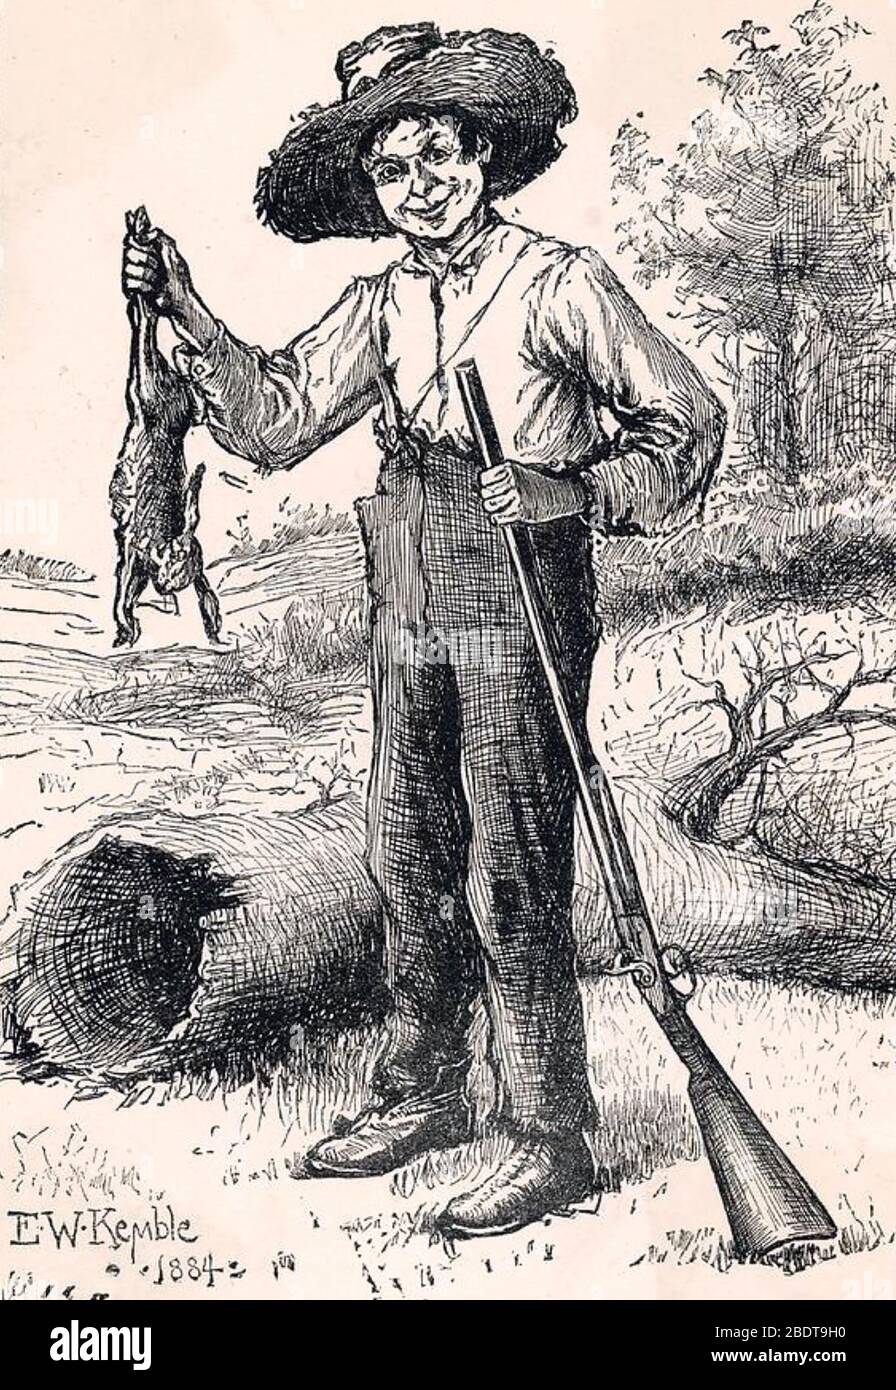 HUCKLEBERRY FINN character in two books by Mark Twain. Illustration by Edward Kemble from the 1884 'Adventures of Huckleberry Finn' Stock Photo